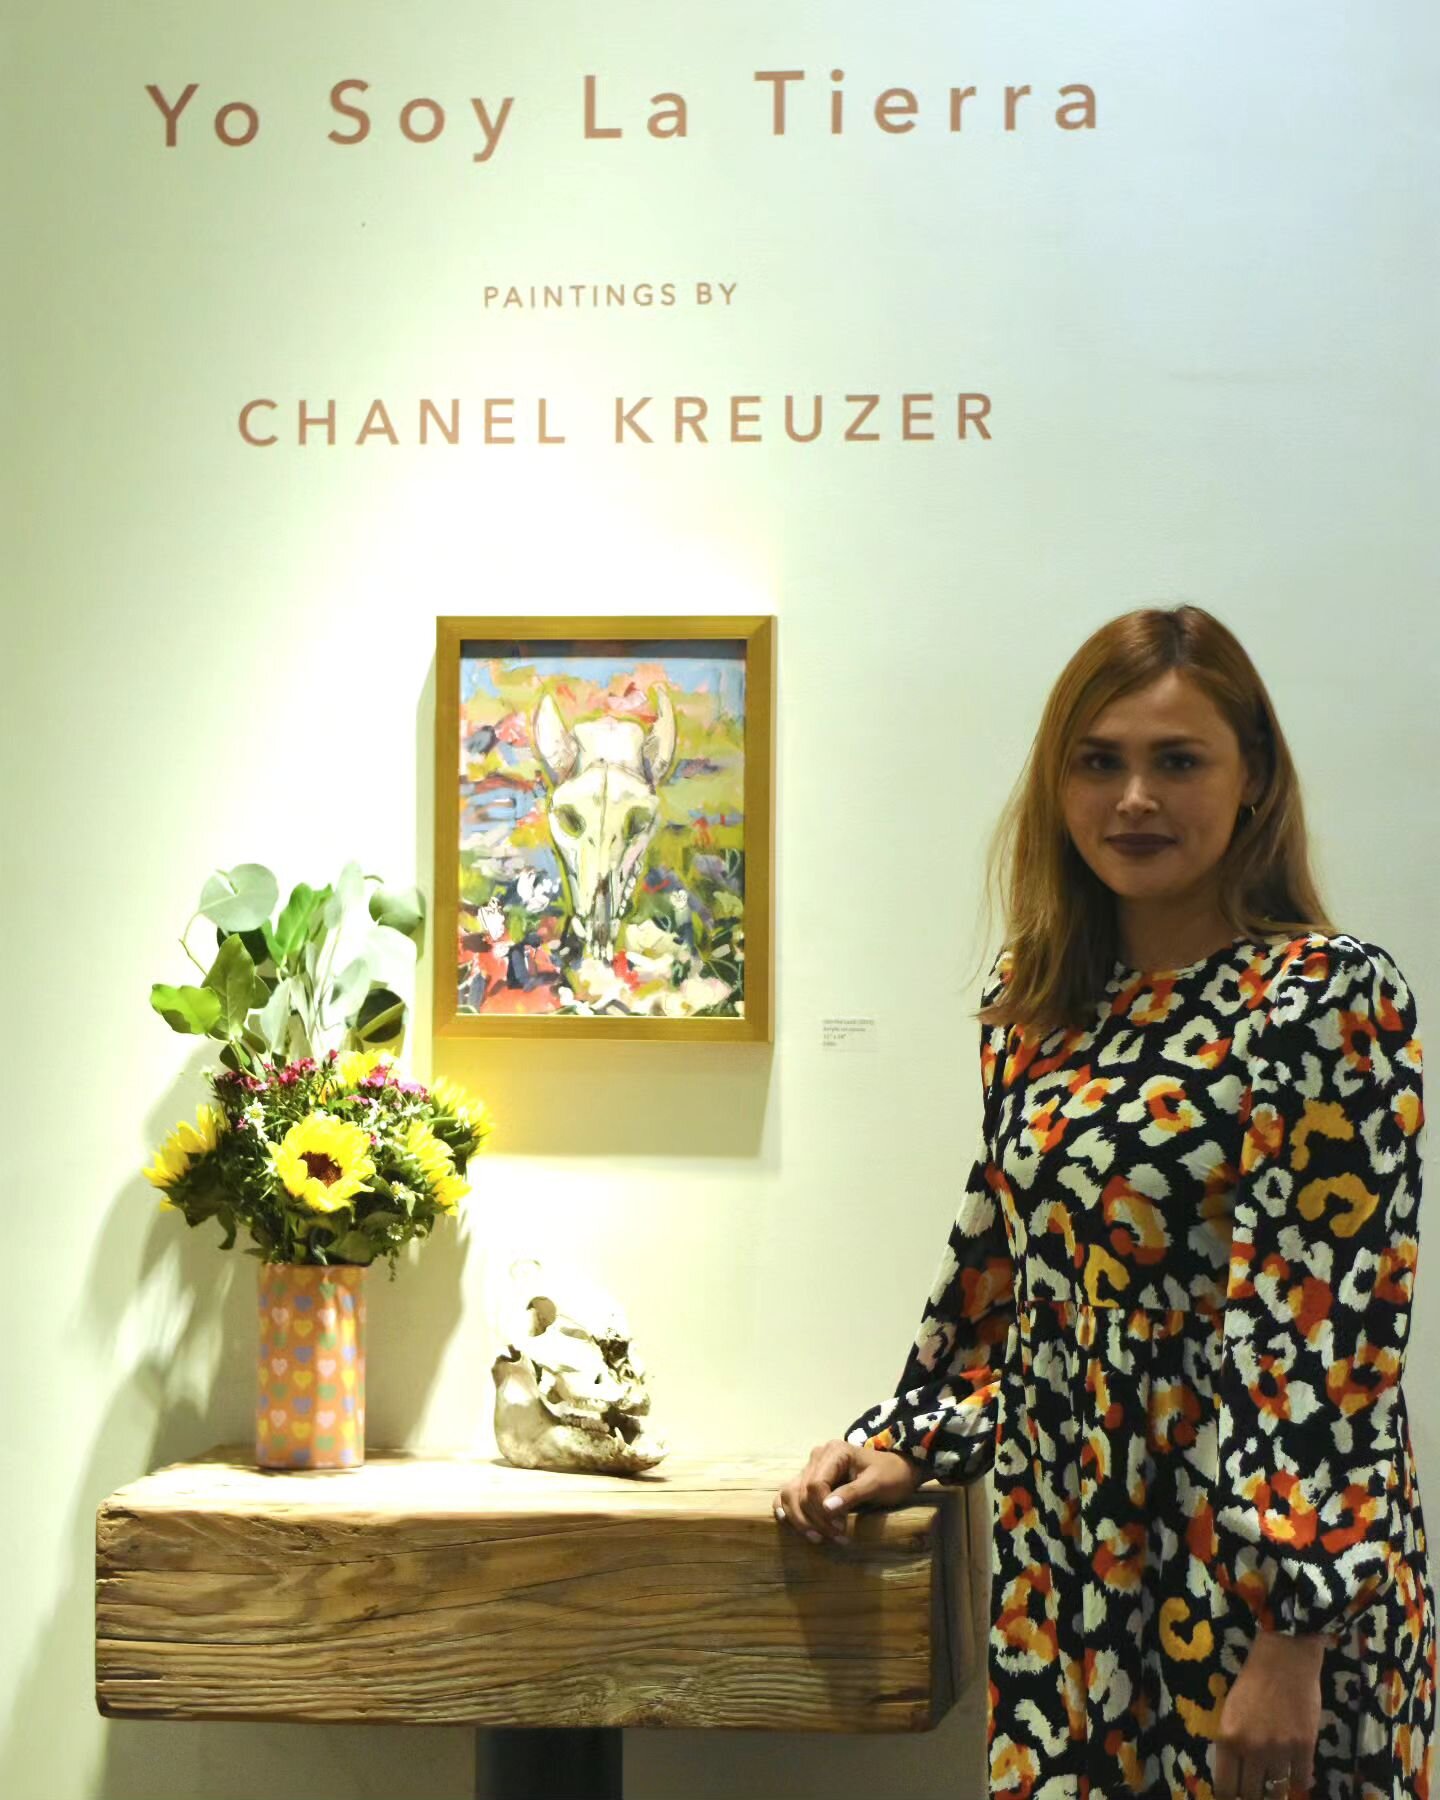 Tomorrow from 12-5 
Meet and greet with artist @chanelkreuzer_art 
It's your last chance to experience  her beautiful show &quot;Yo Soy la Tierra&quot; in person!
Come celebrate and support some local art with us!